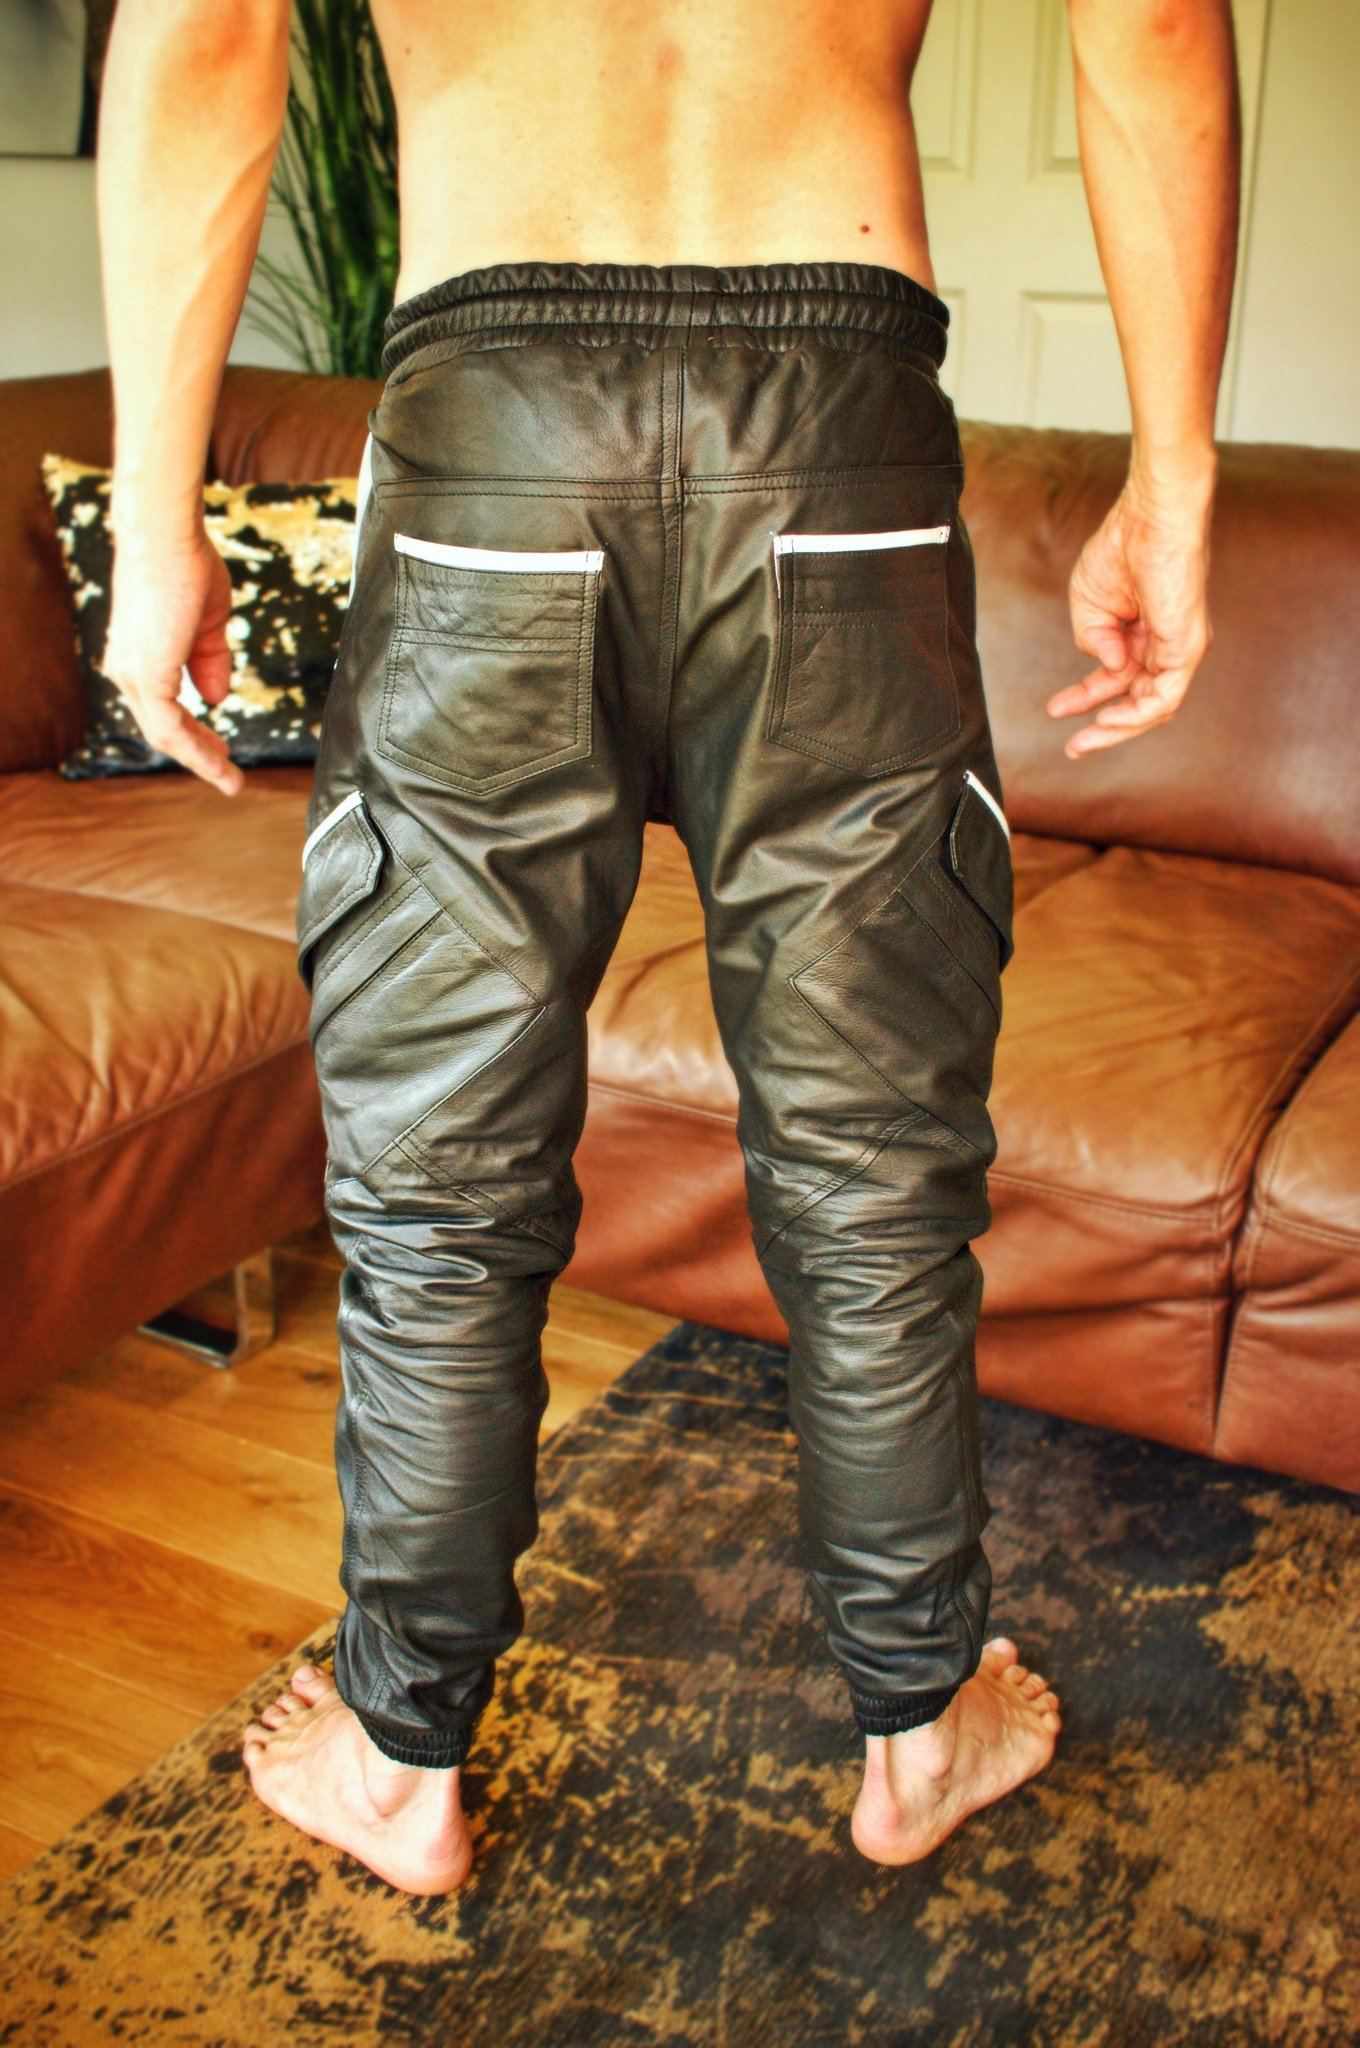 messy leather pants, messy leather pants, gitblp